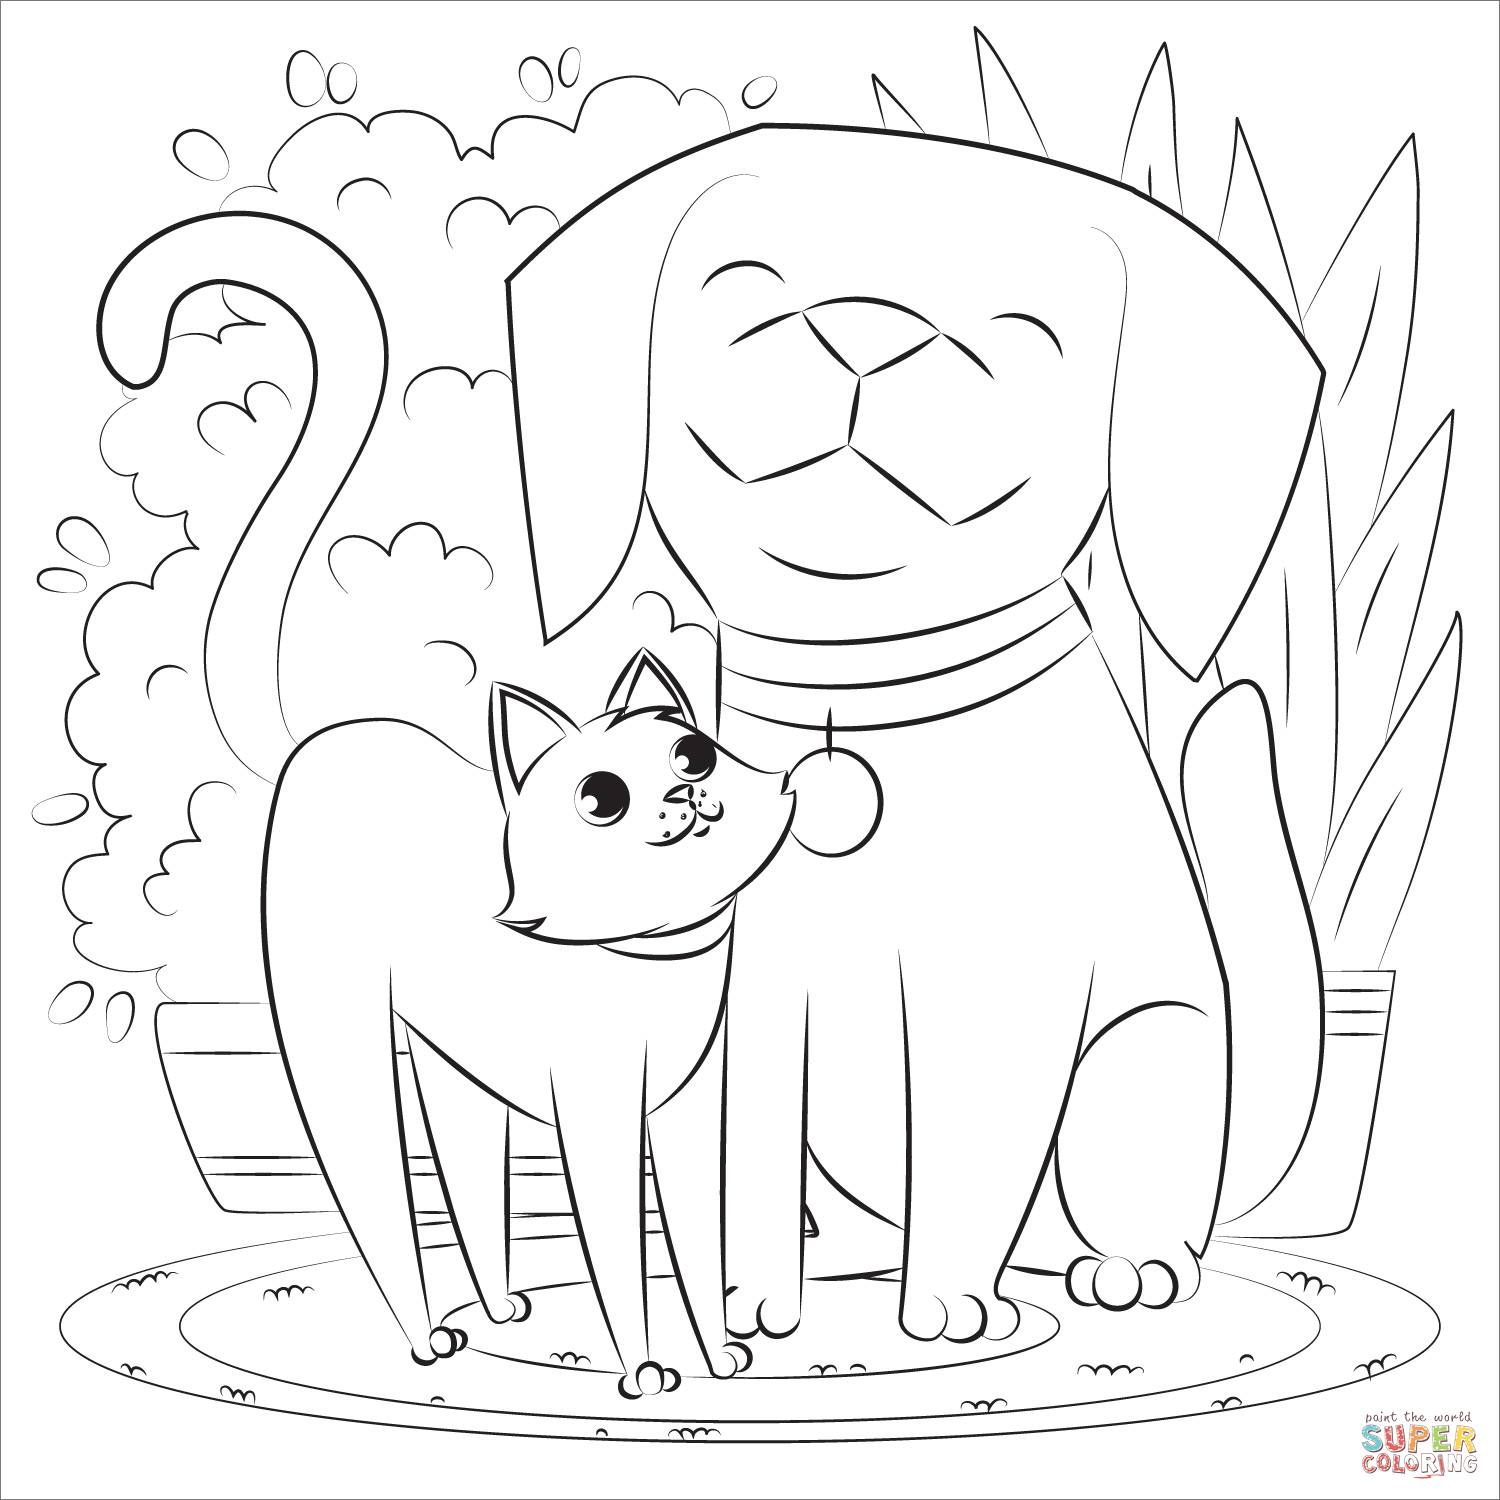 Dog and cat coloring page free printable coloring pages